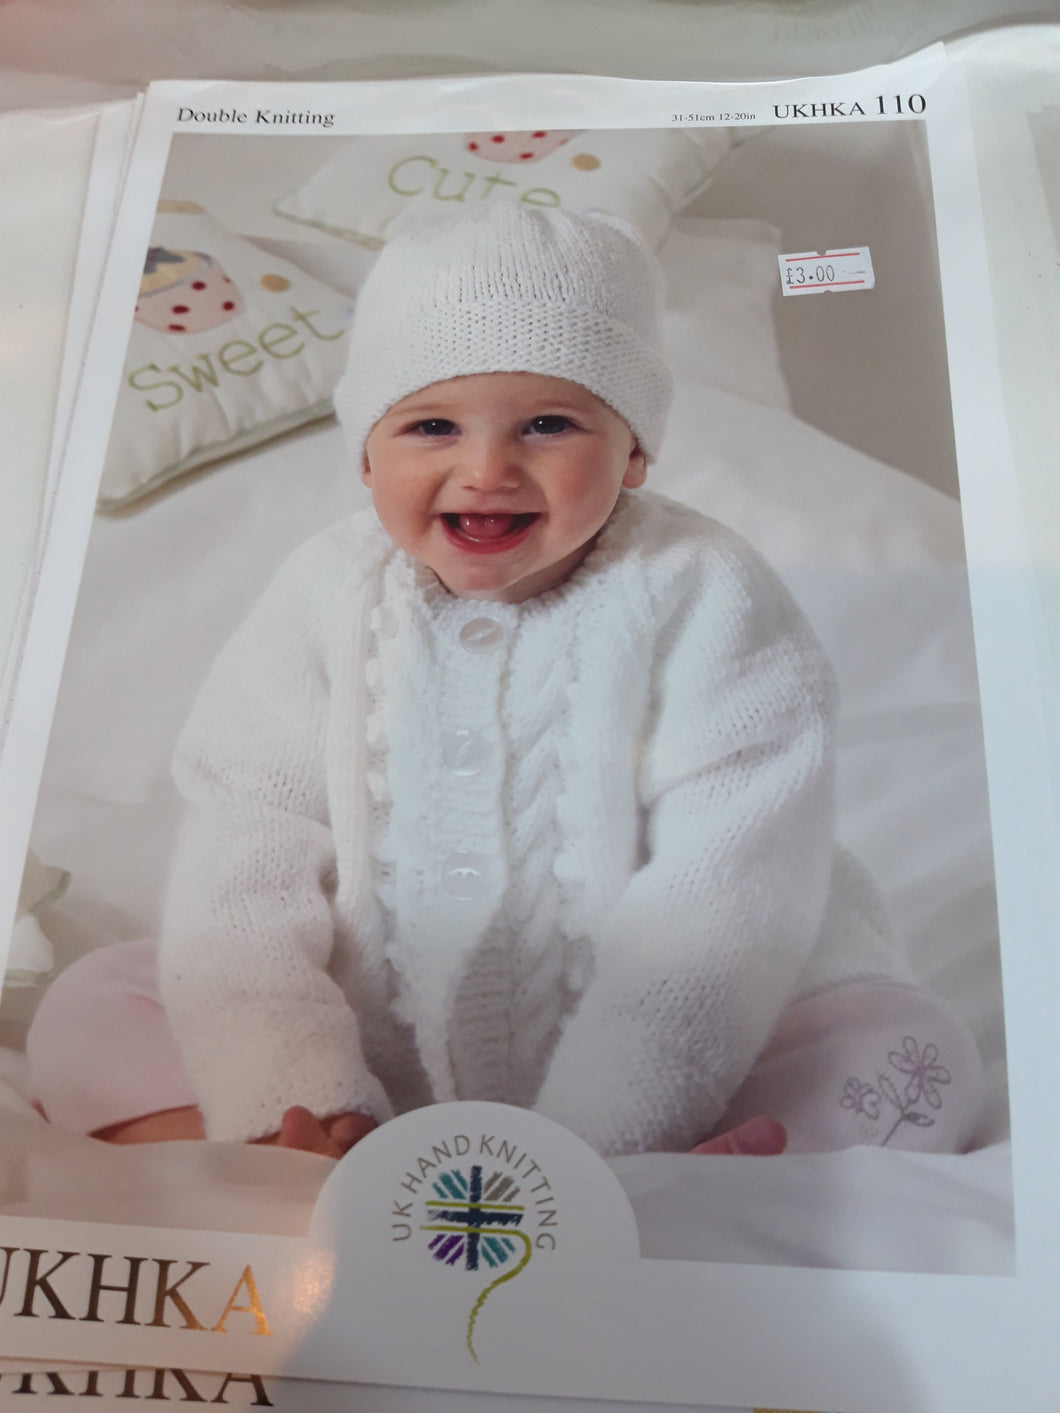 UKHKA 110 - Baby Double Knit - Cardigan, Hat and Blanket - 12